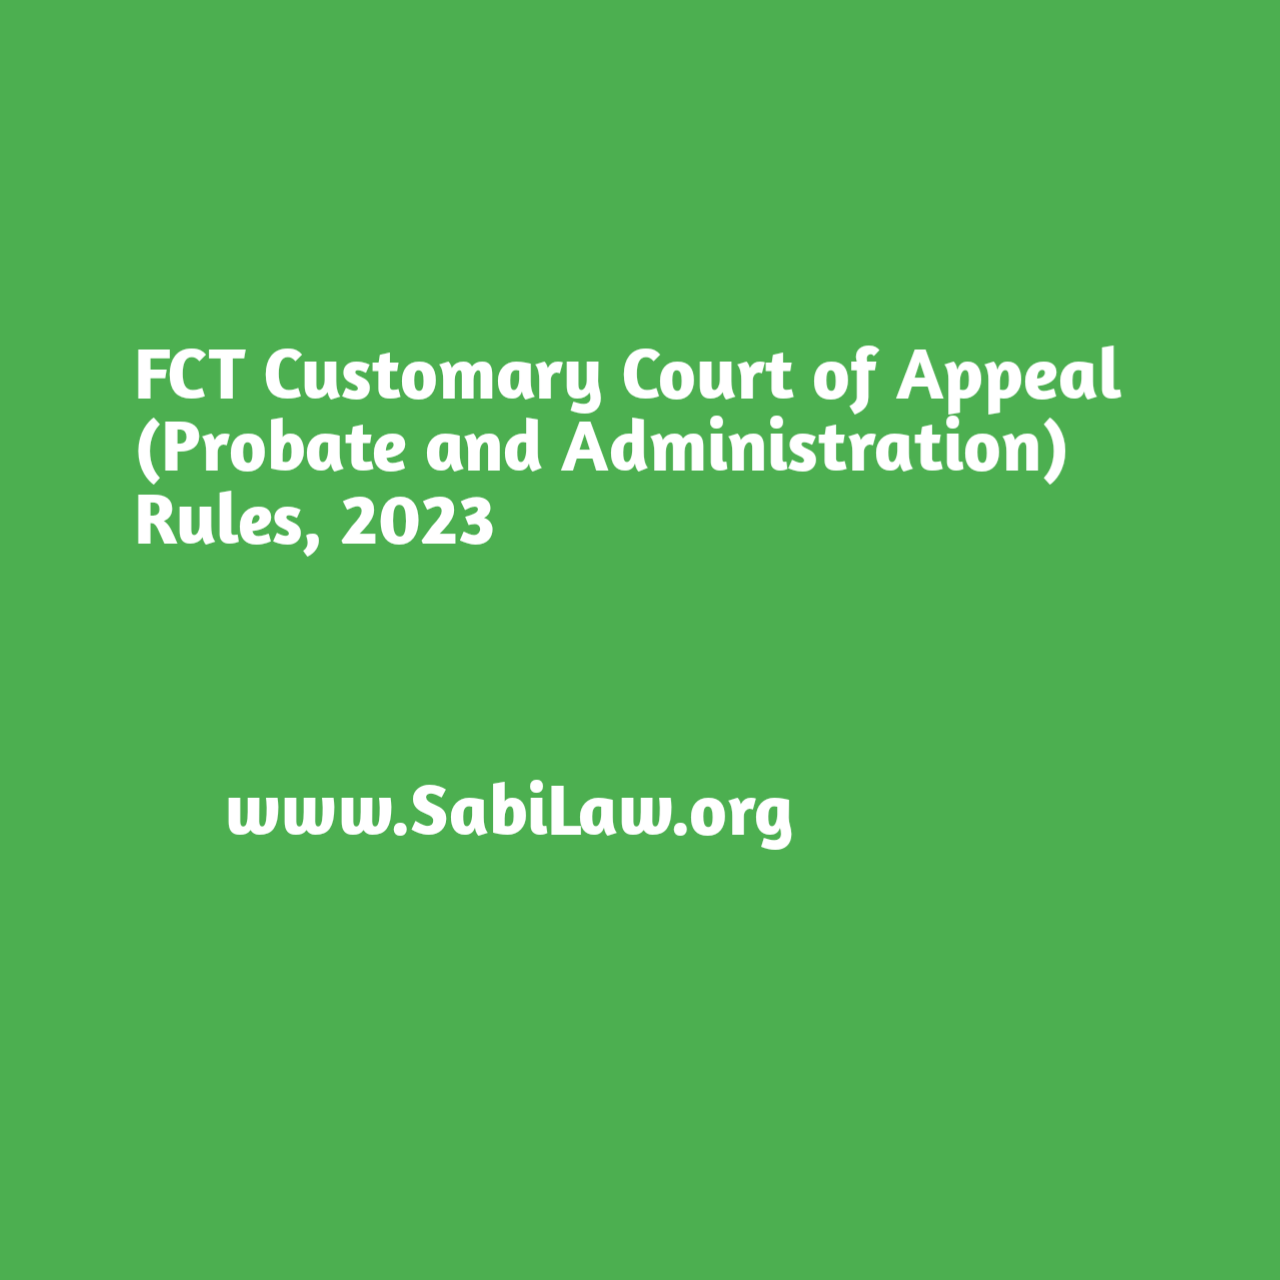 Click to download the FCT Customary Court of Appeal (Probate and Administration) Rules, 2023